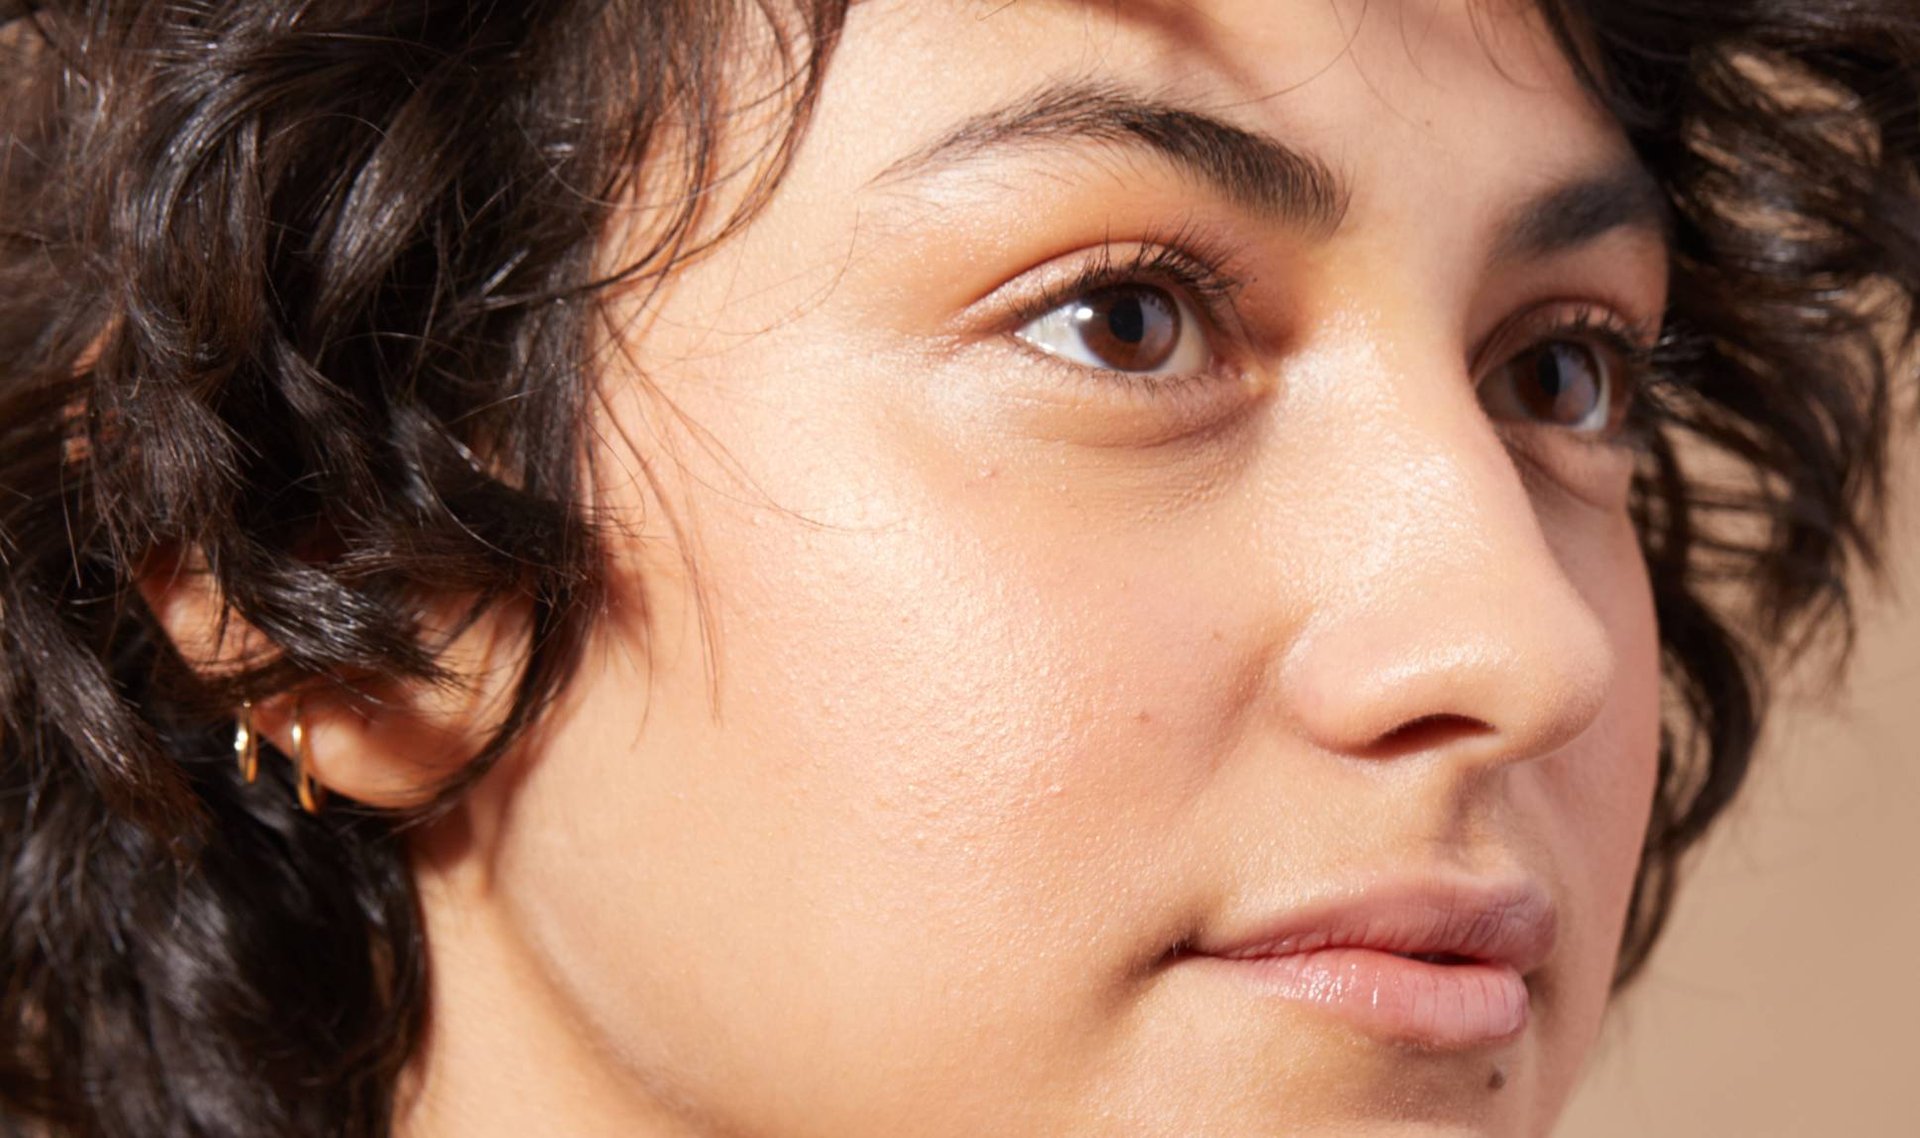 Milia: What You Need to Know About the Tiny White Bumps on Your Face